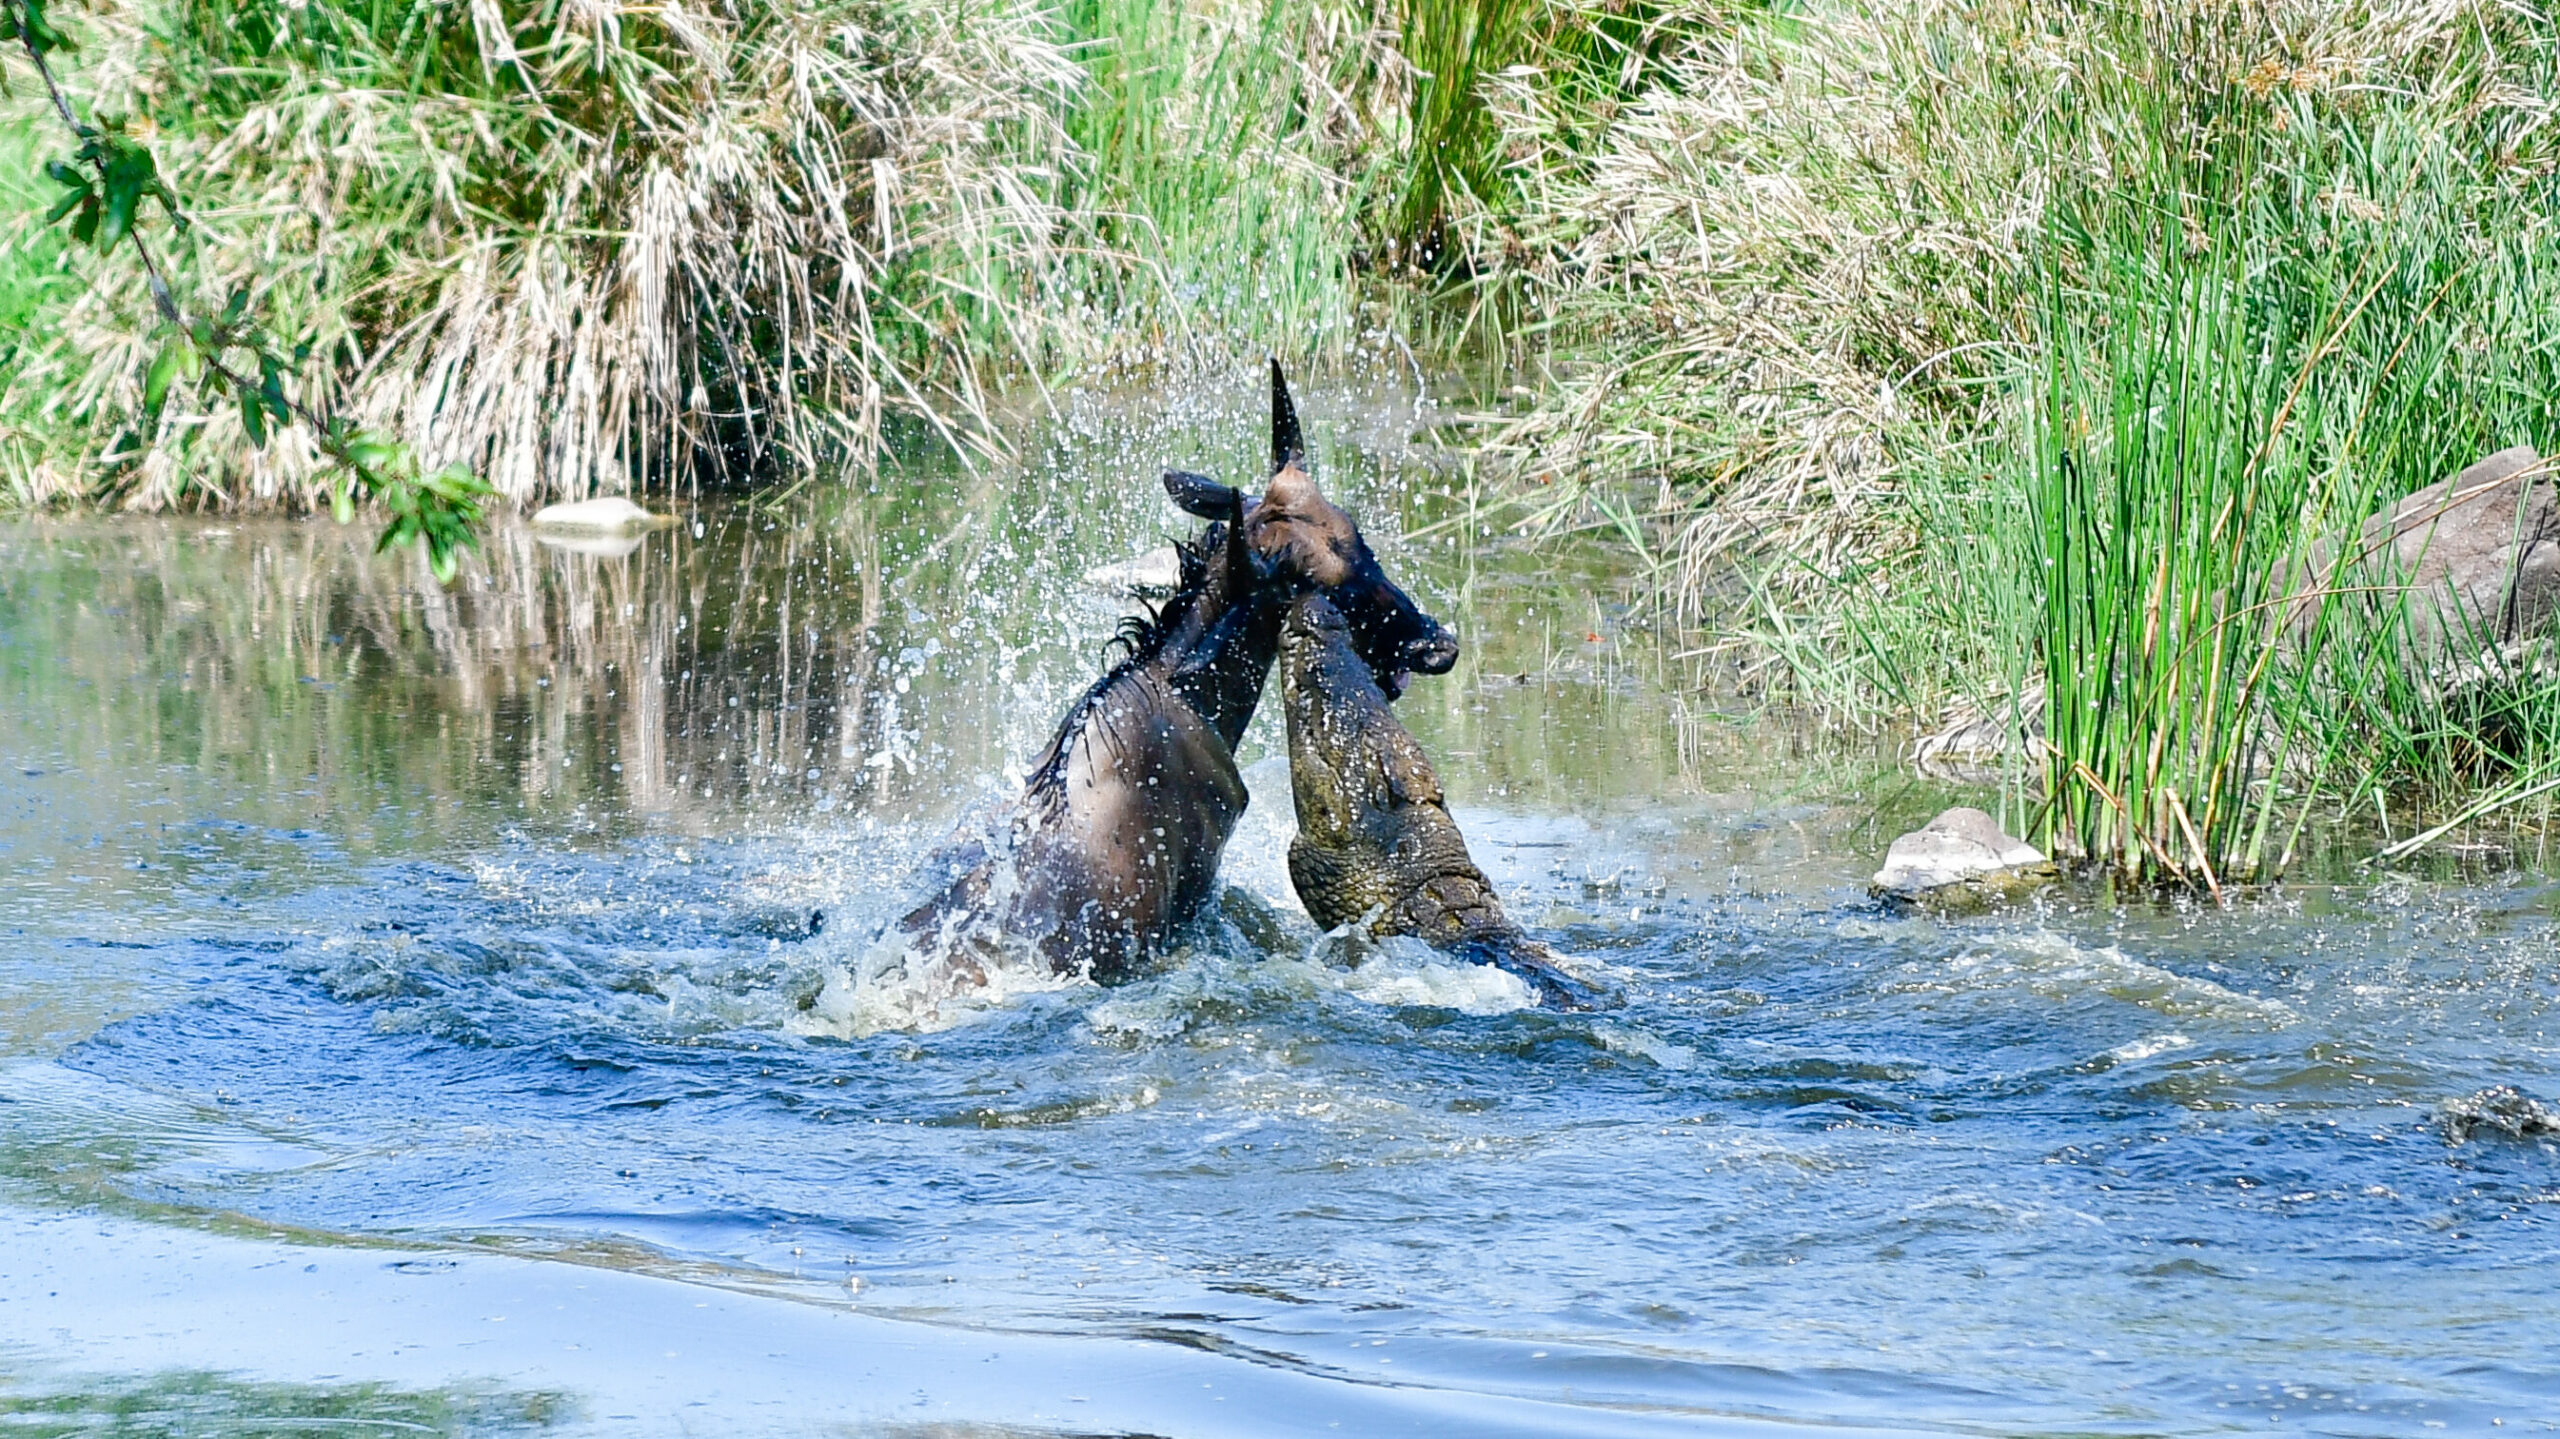 Wildebeest Escapes Small Croc to Swim into Jaws of Monster Croc